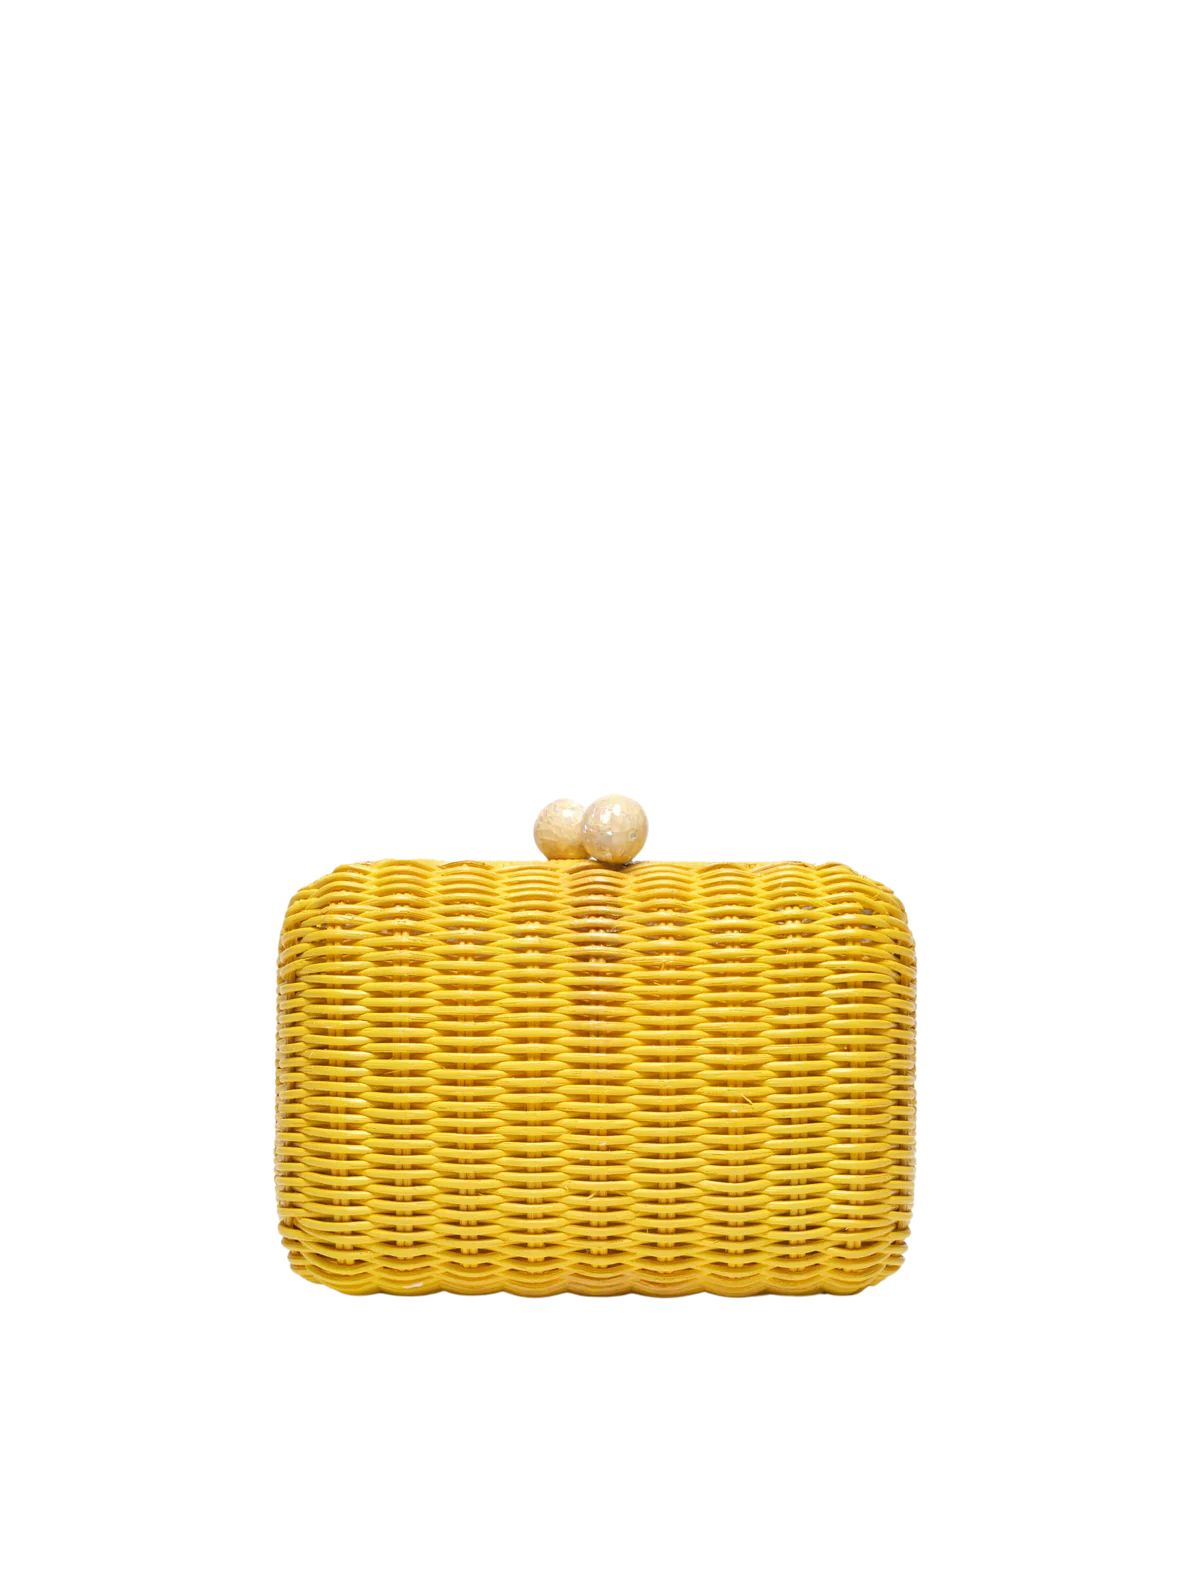 Grace Wicker Straw Clutch Bag | Over The Moon